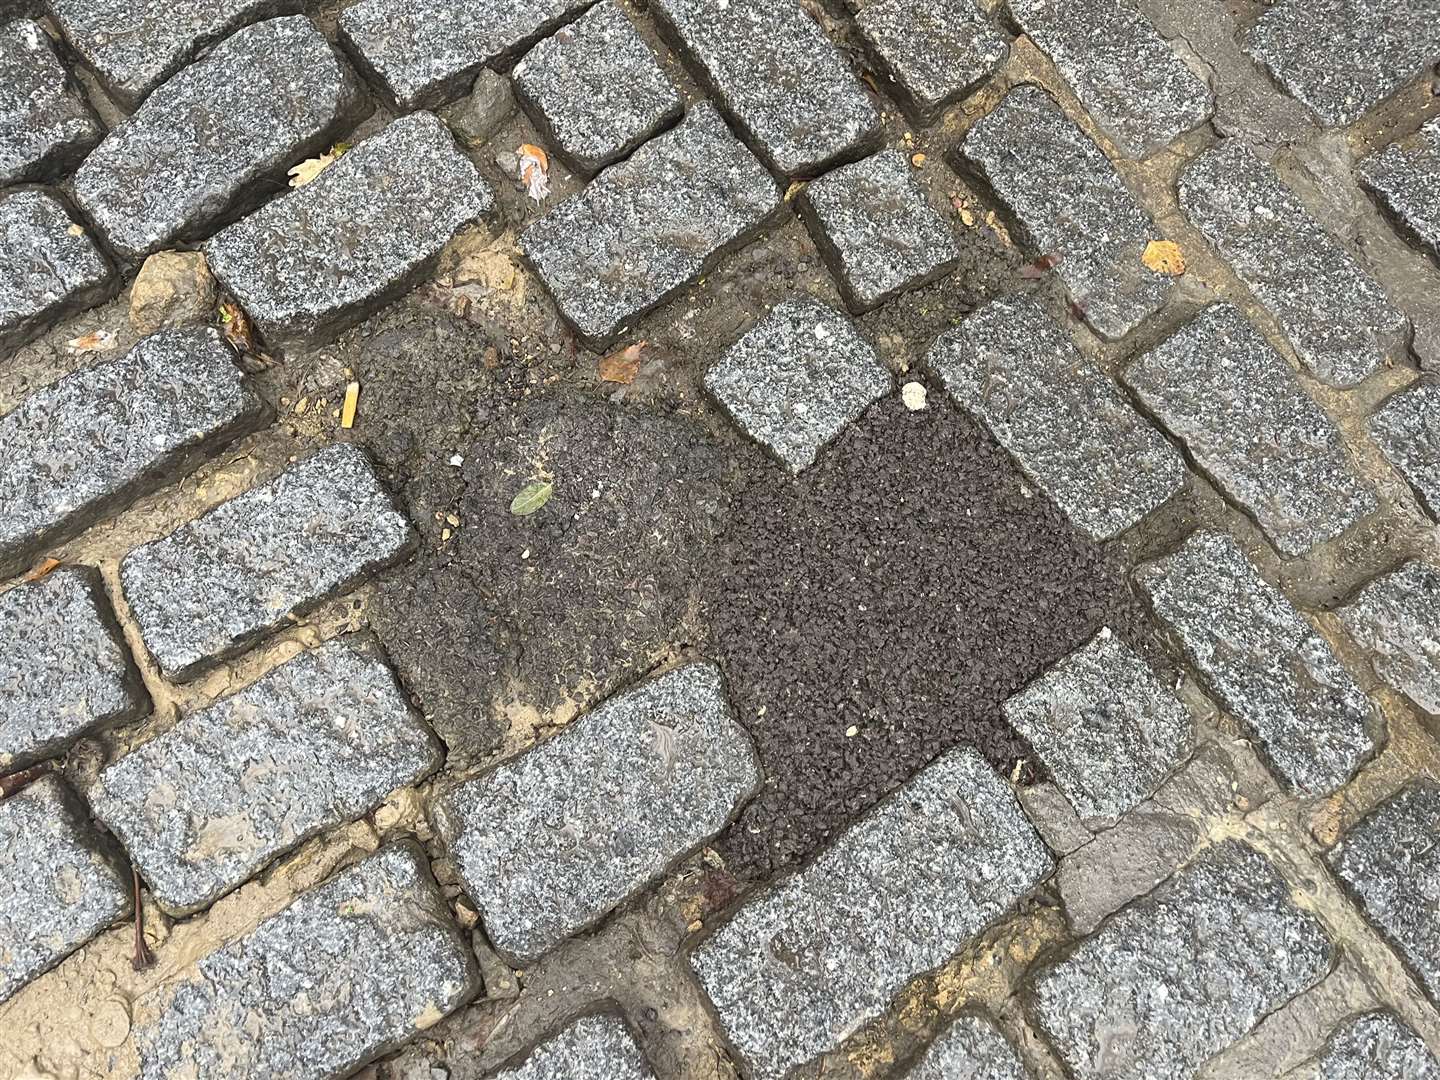 The cobbles will be replaced with black tarmac